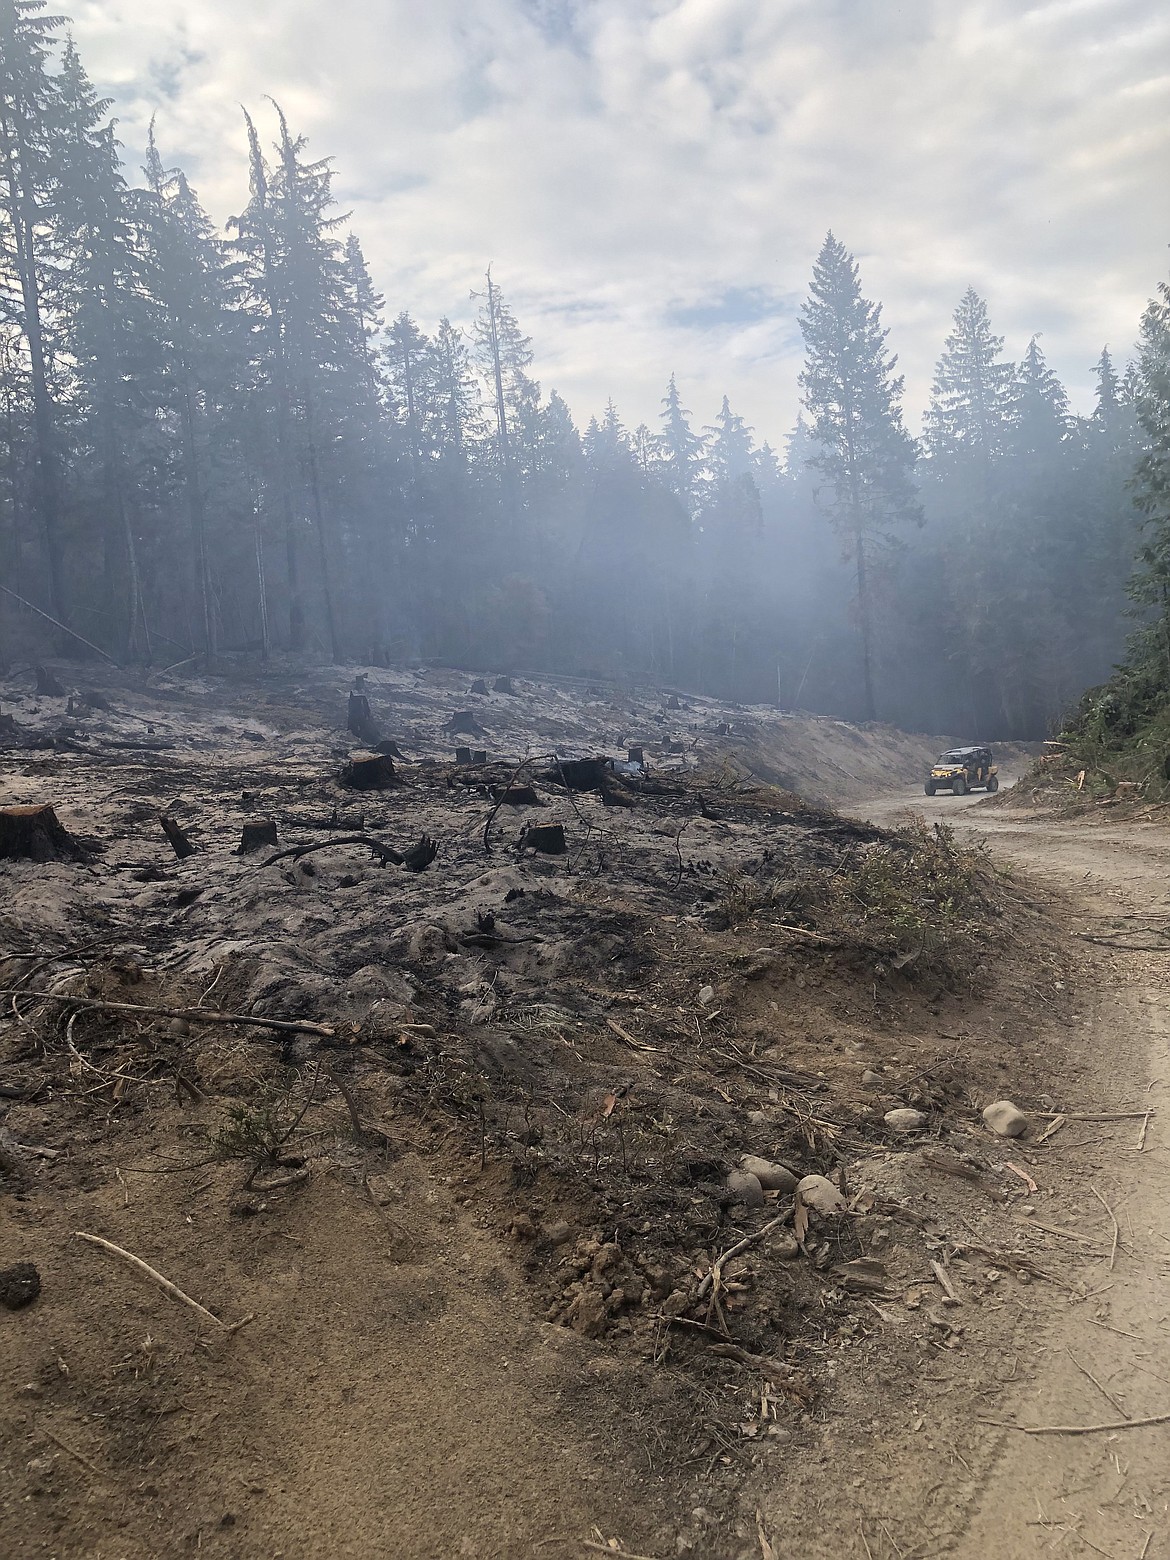 An area burned by the Diamond Watch Fire in Pend Oreille County, Wash.